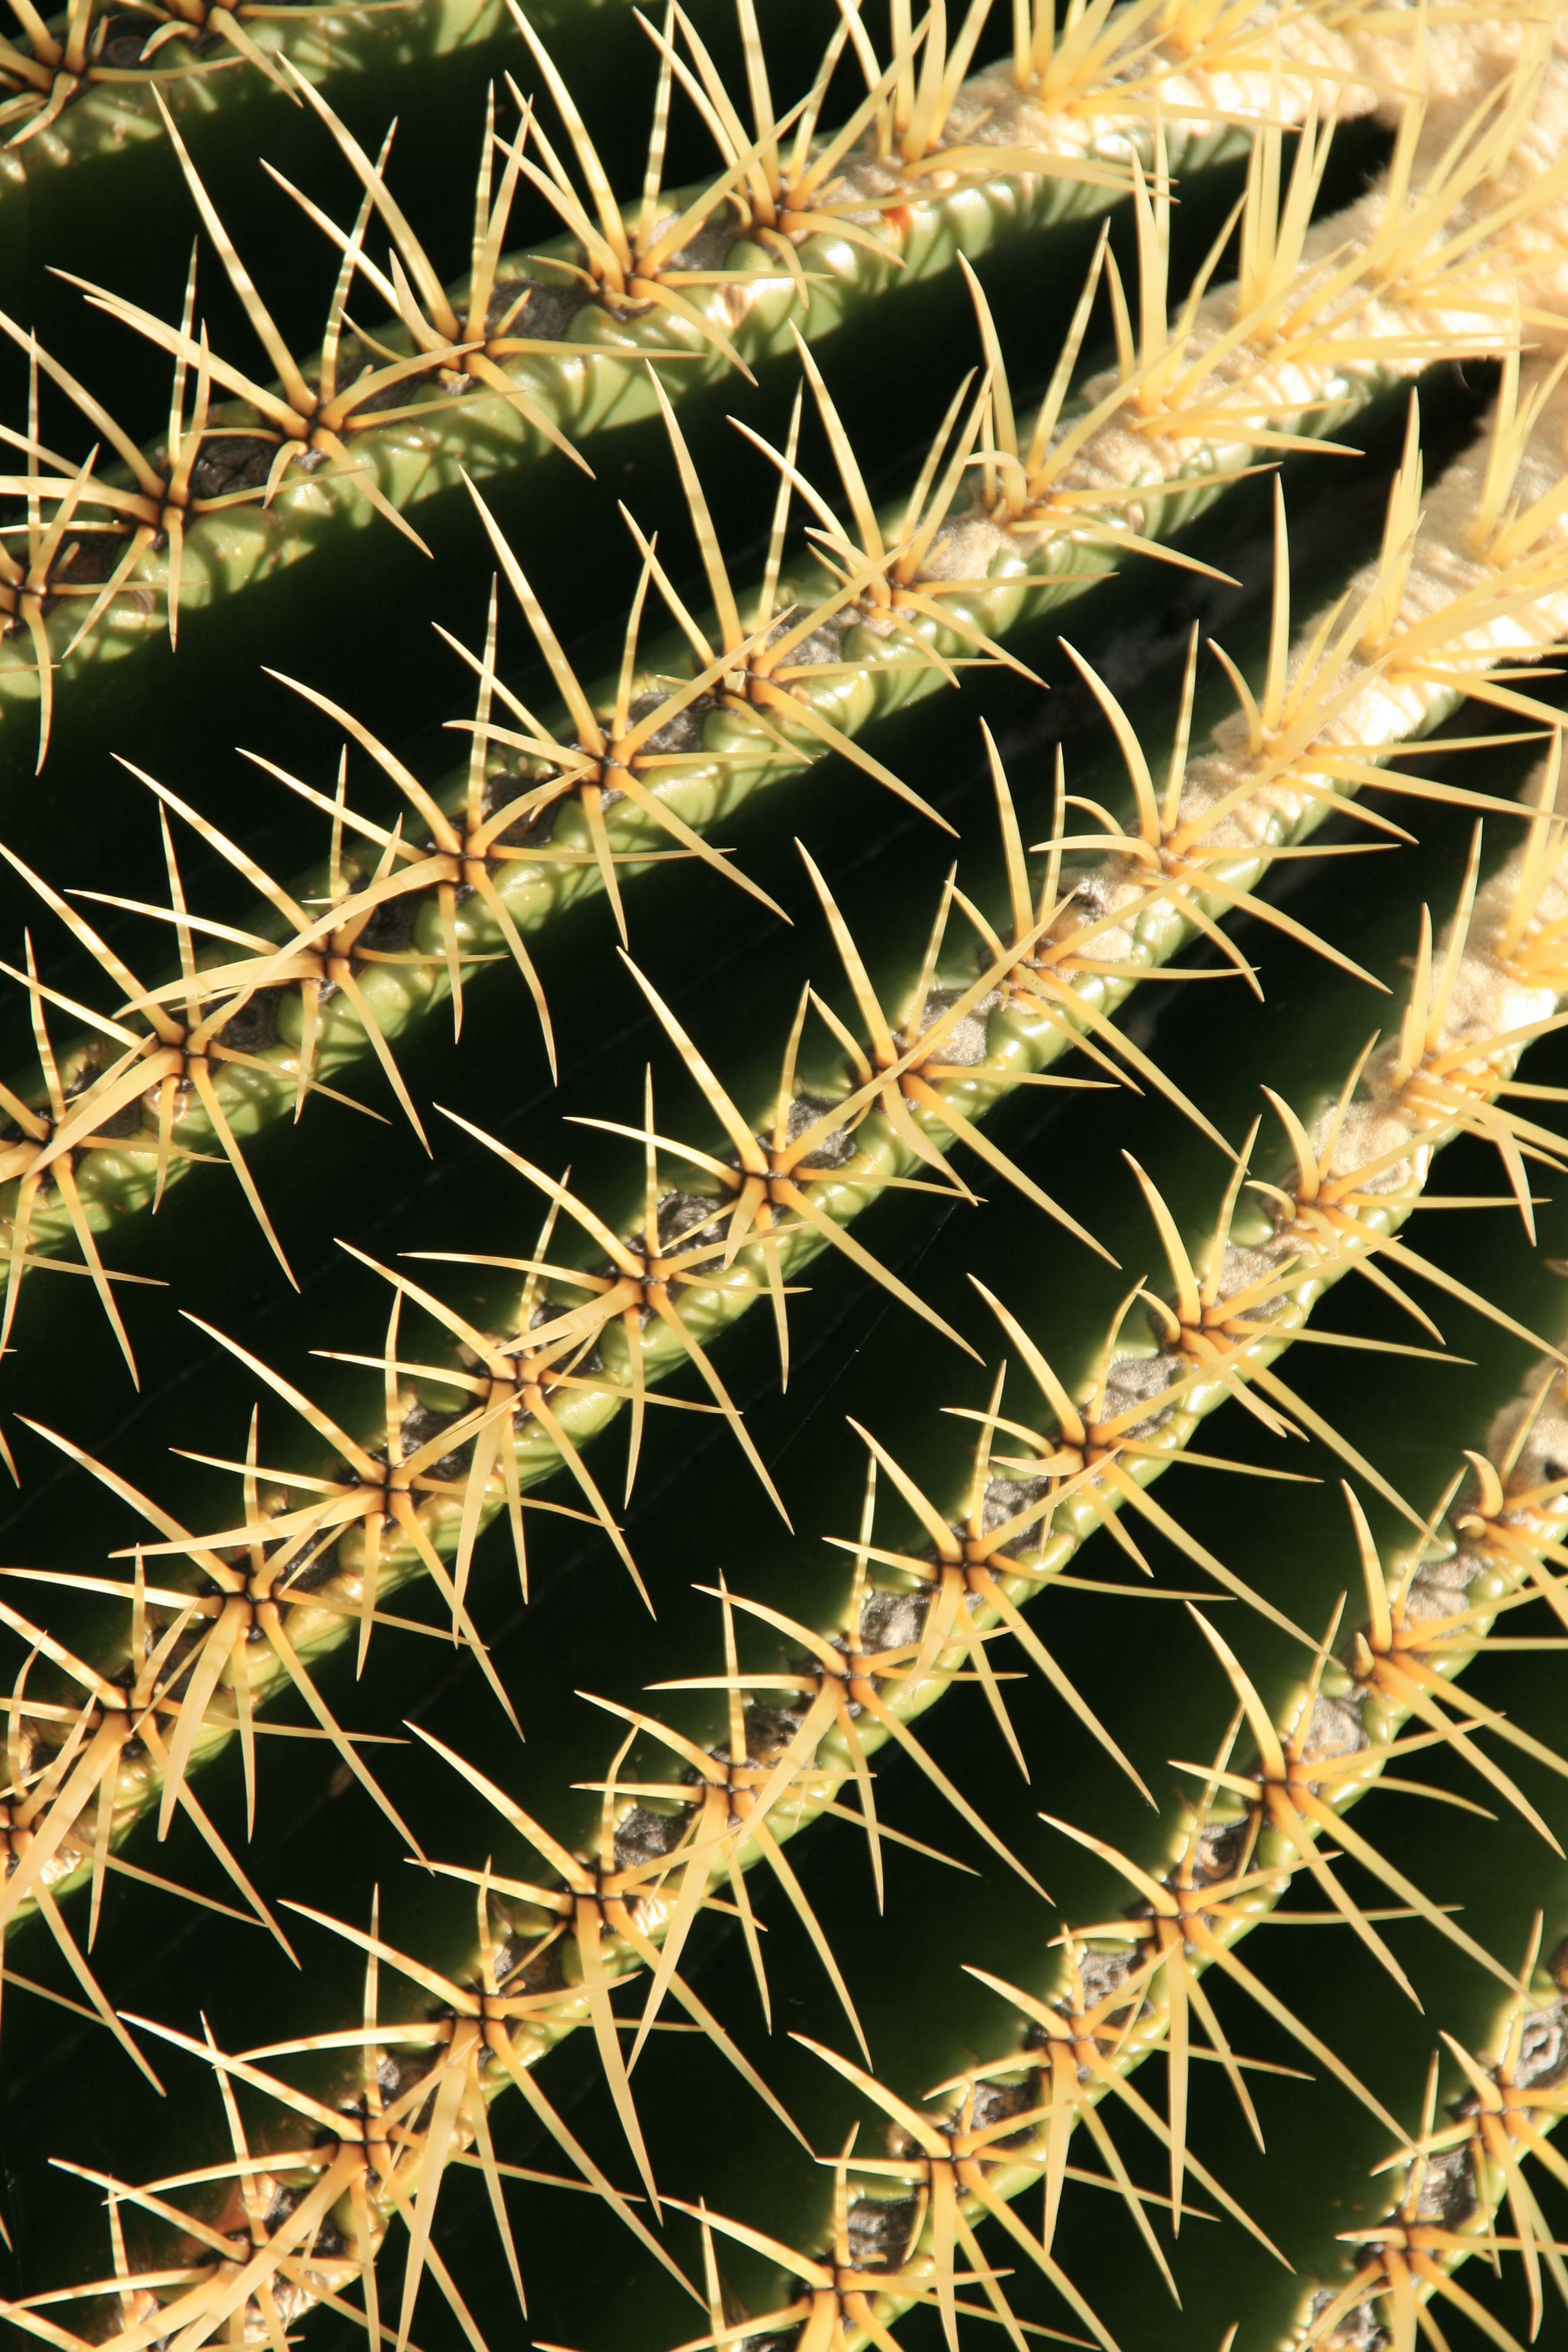 File:Cactus close-up, but dont get too close, ouch! (3225490111).jpg ...